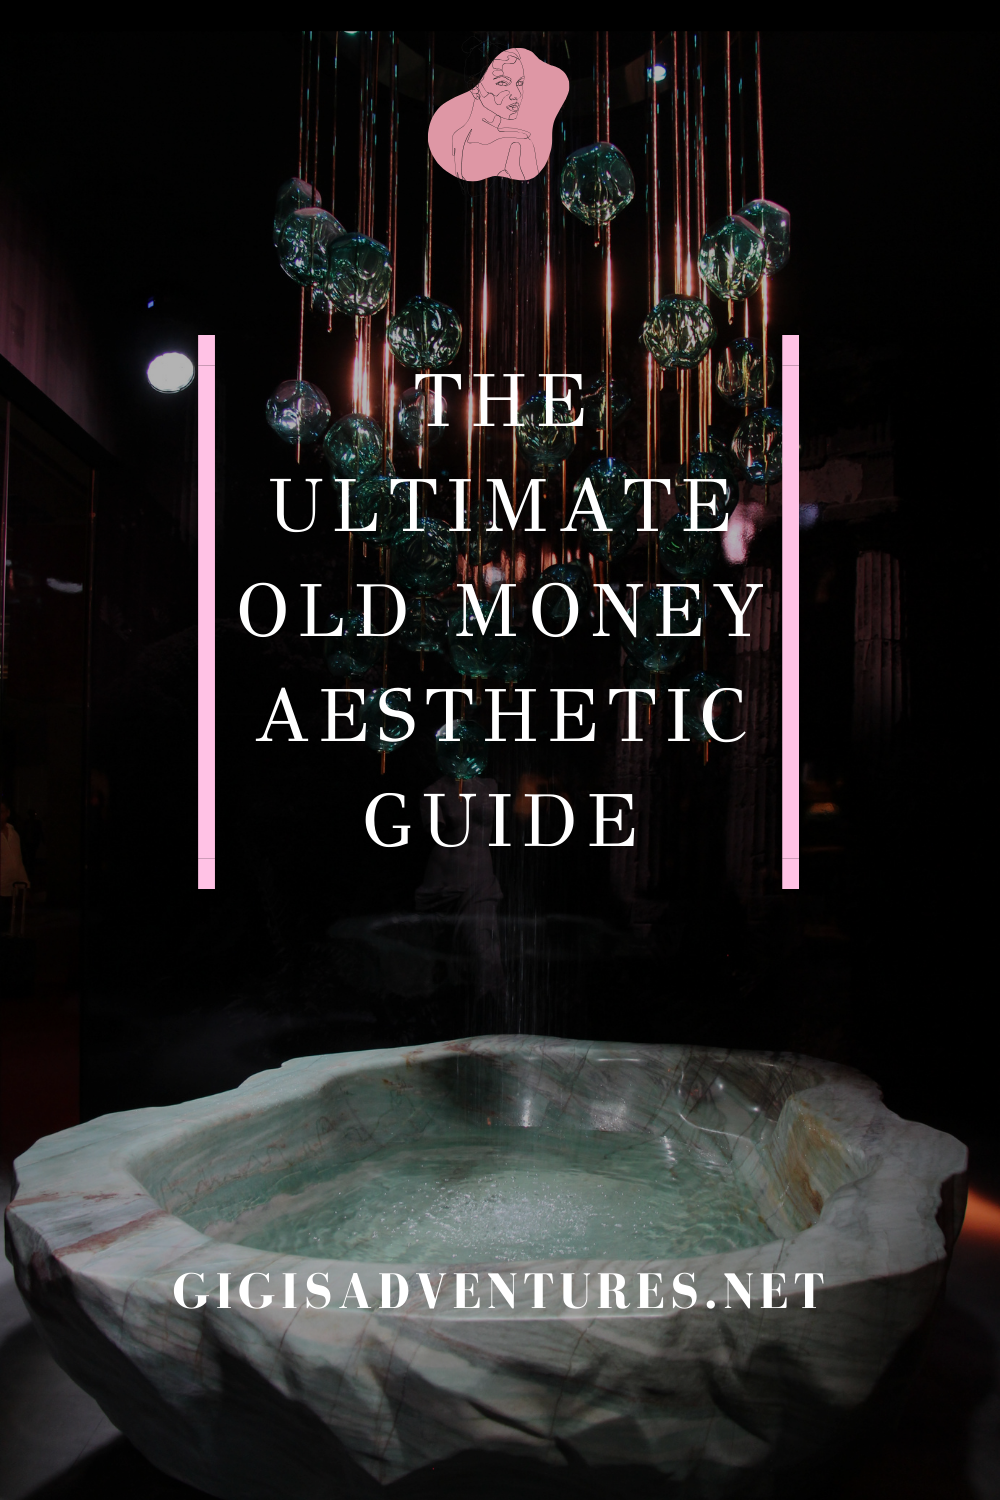 The Ultimate Old Money Aesthetic Guide To Change Your Life